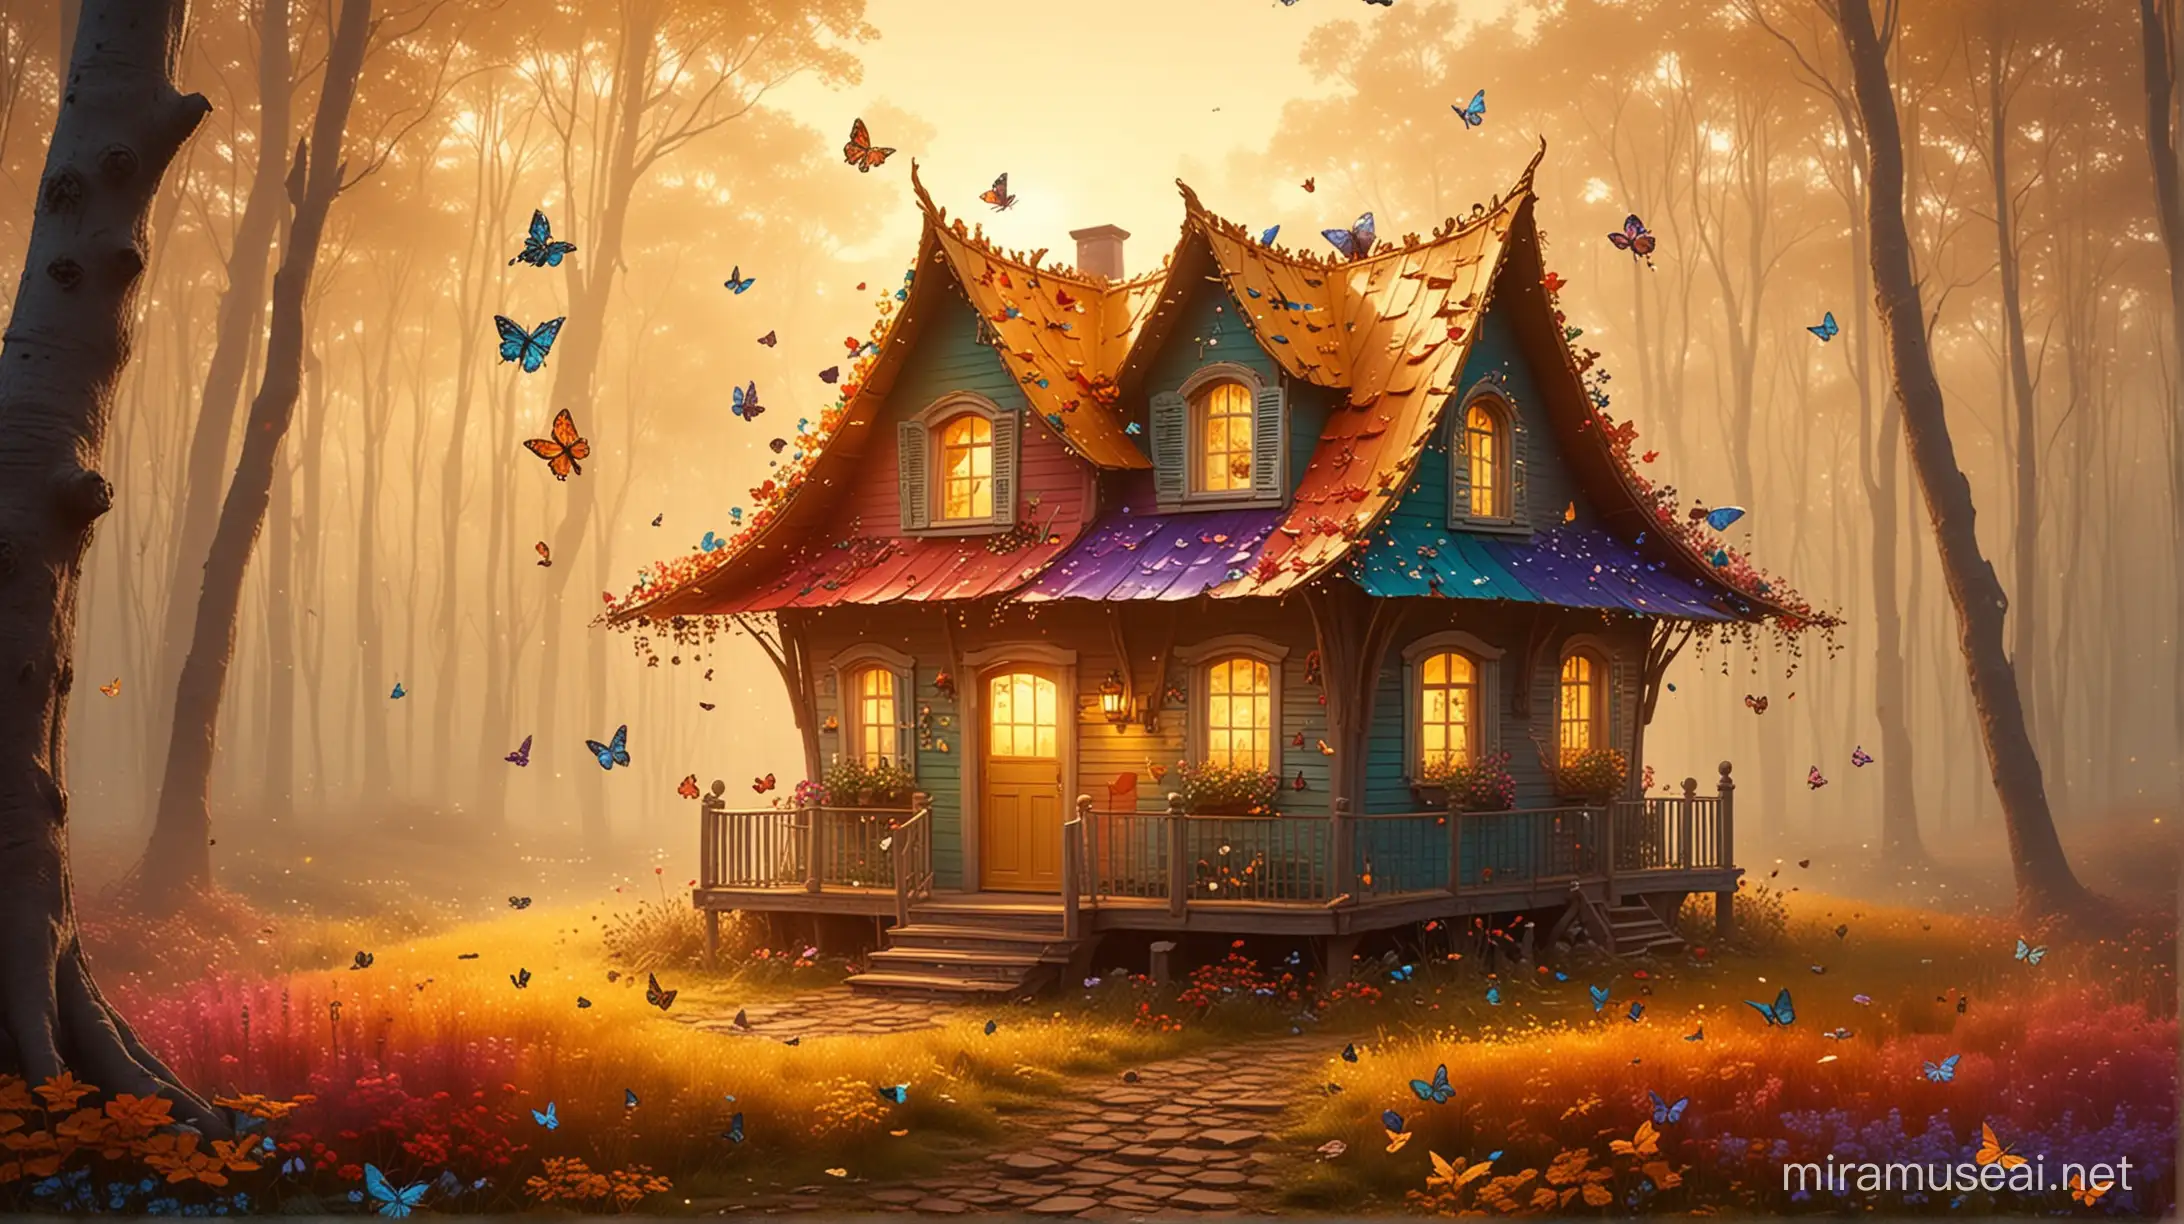 Create a beautiful colorful house in the middle of a forest. With golden fog and little butterflies
